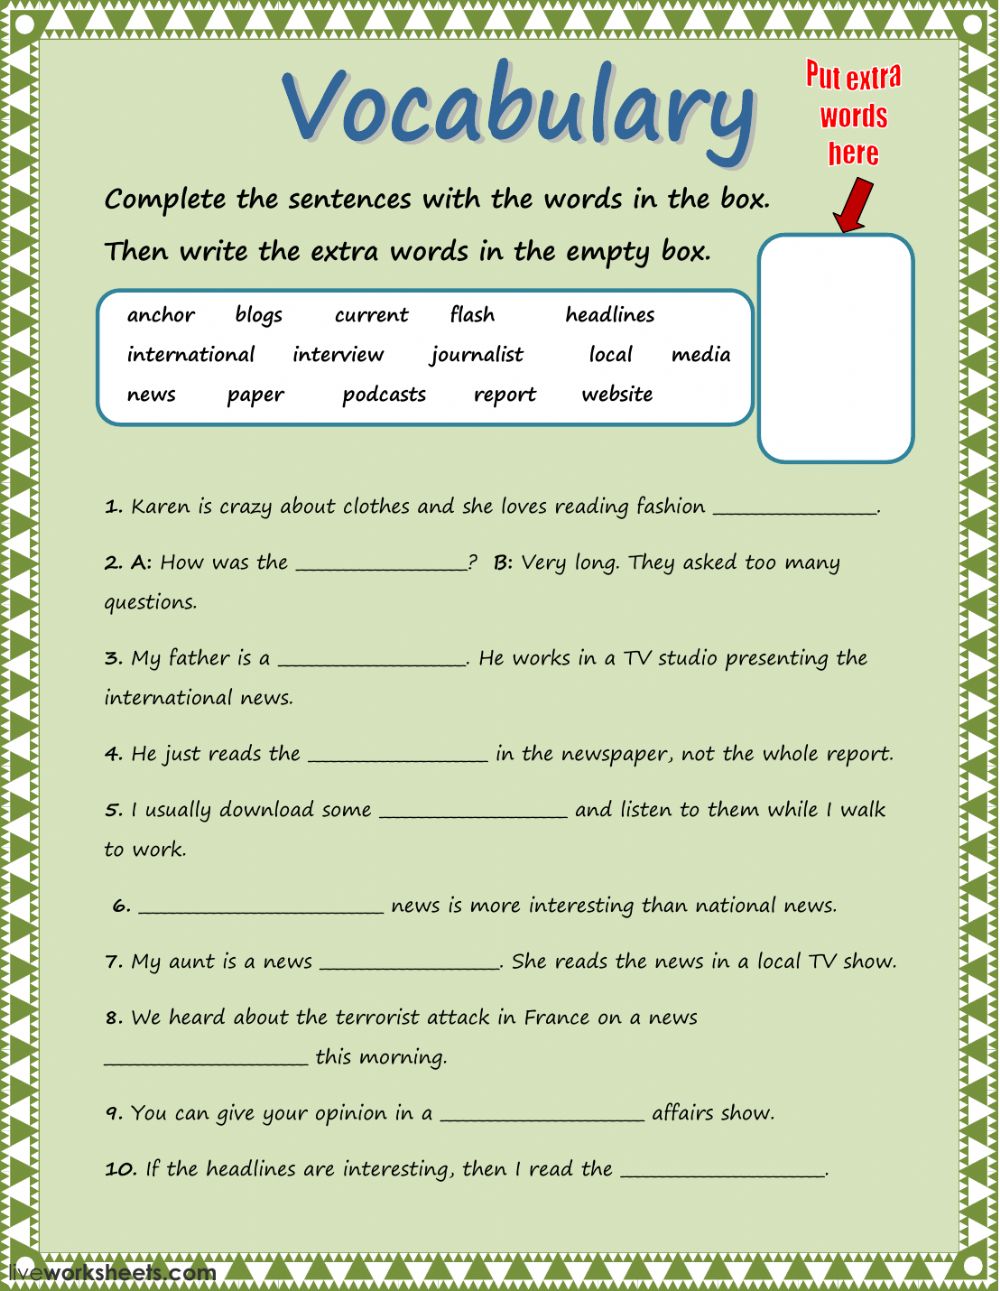 English Vocabulary Worksheets For Grade 4 Pdf